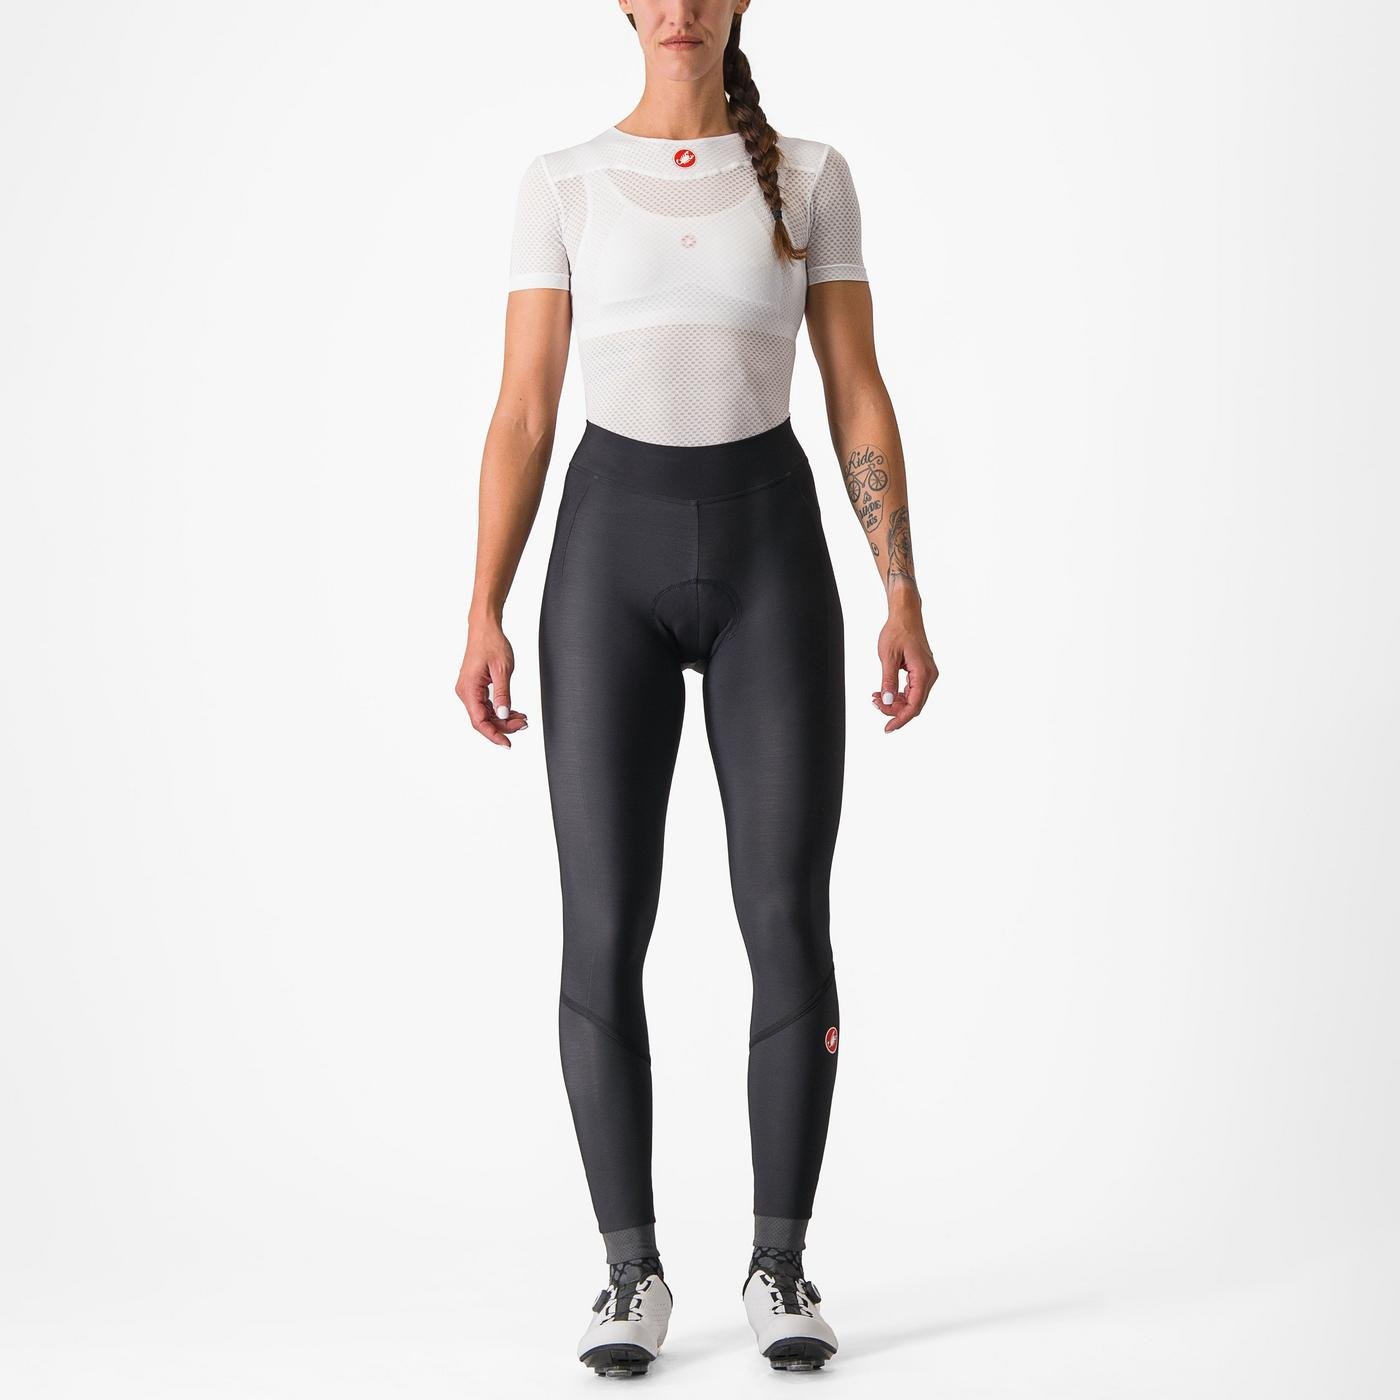 Stay Warm and Stylish with the Top Winter Cycling Bib Tights